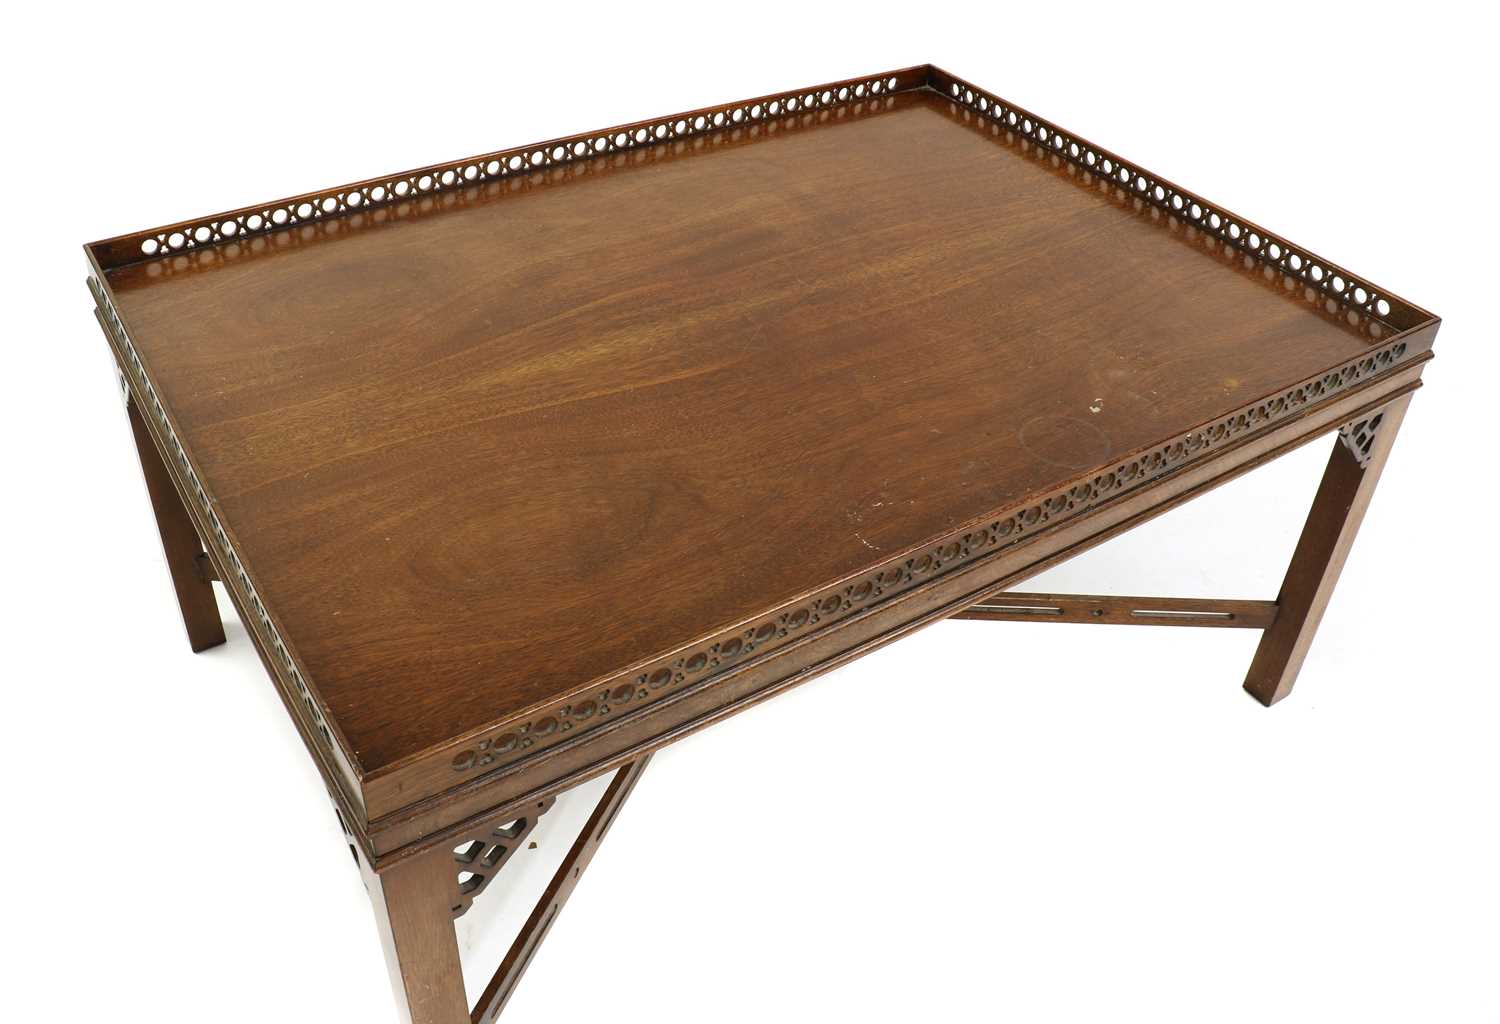 A mahogany Chippendale-style coffee table, - Image 2 of 3